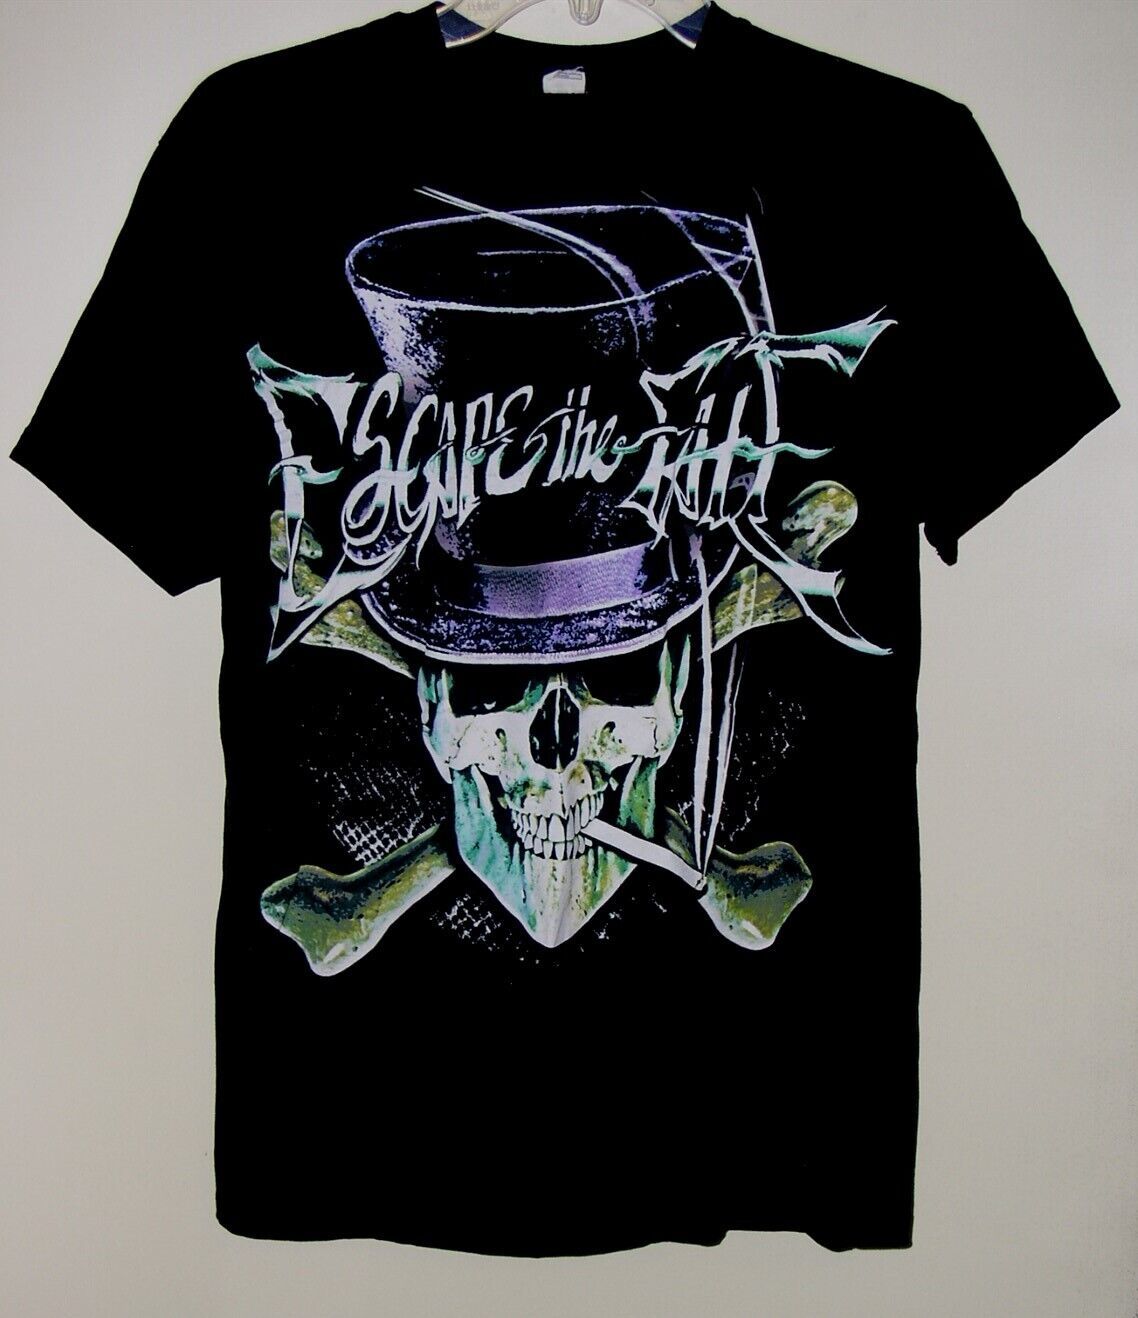 Primary image for Escape The Fate Band Shirt Top Hat Skull Cross Bones Vintage Size Small